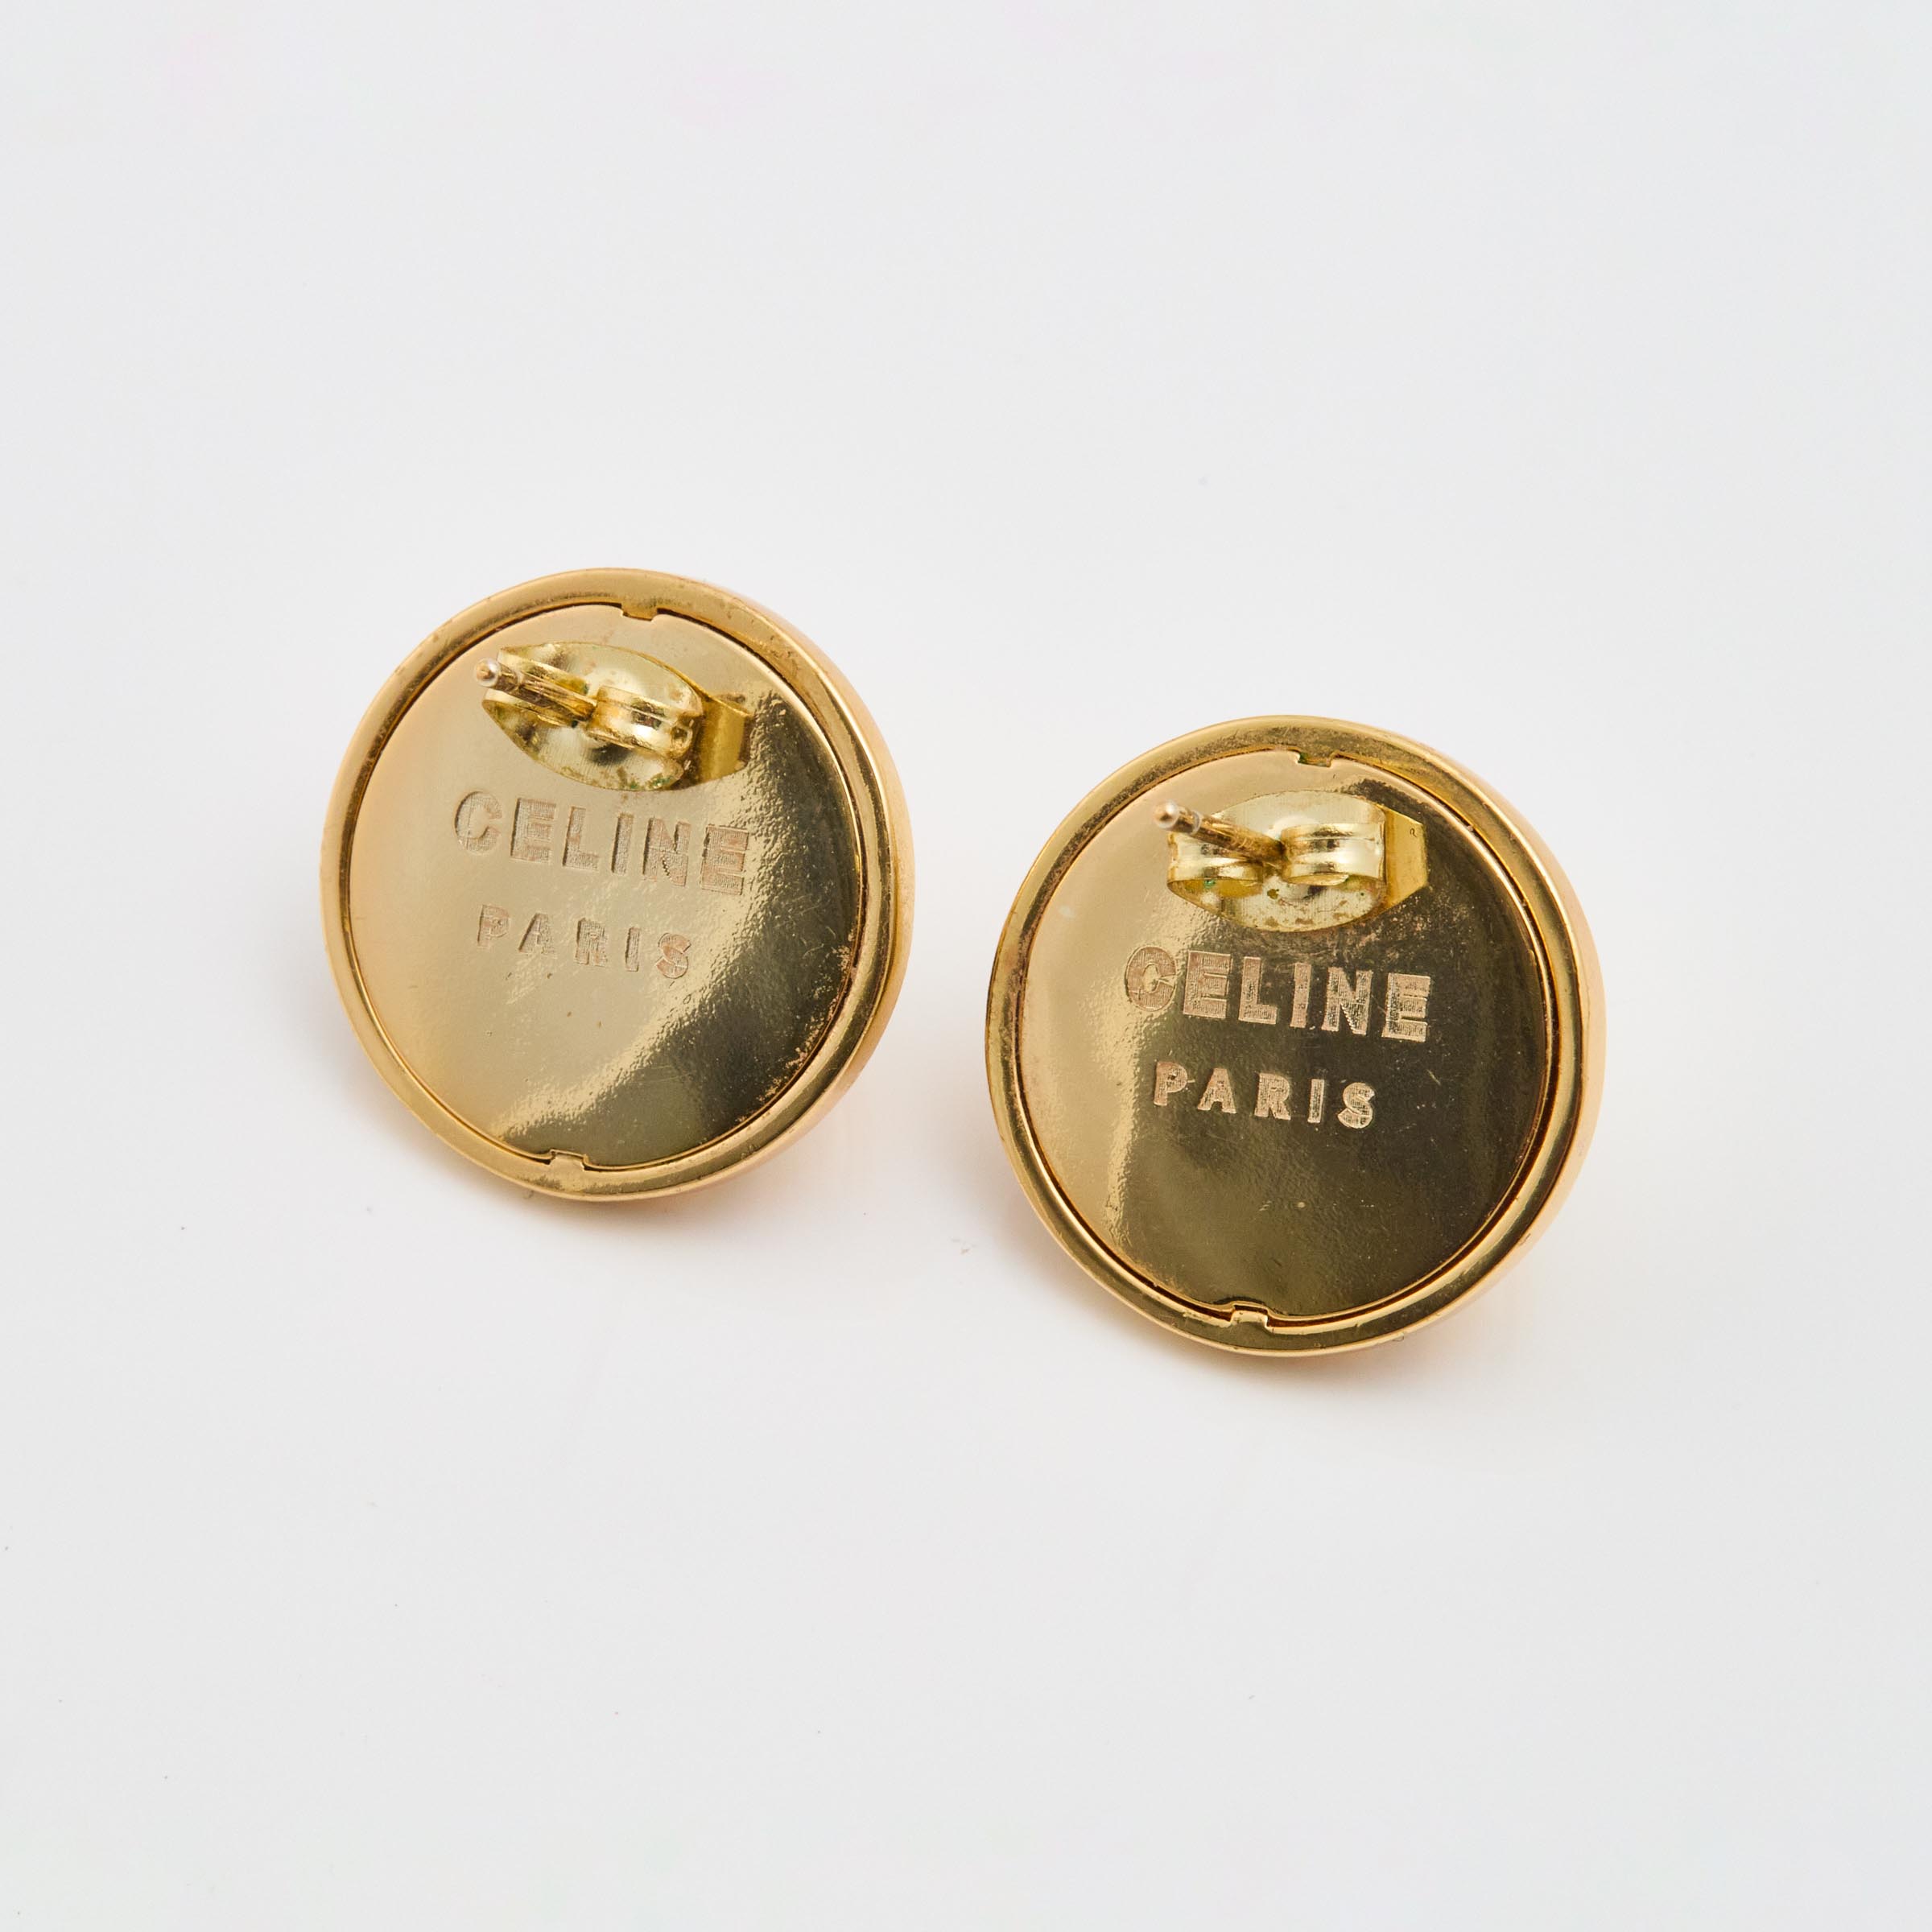 Pair Of Celine Gold-Tone Metal Button Earrings